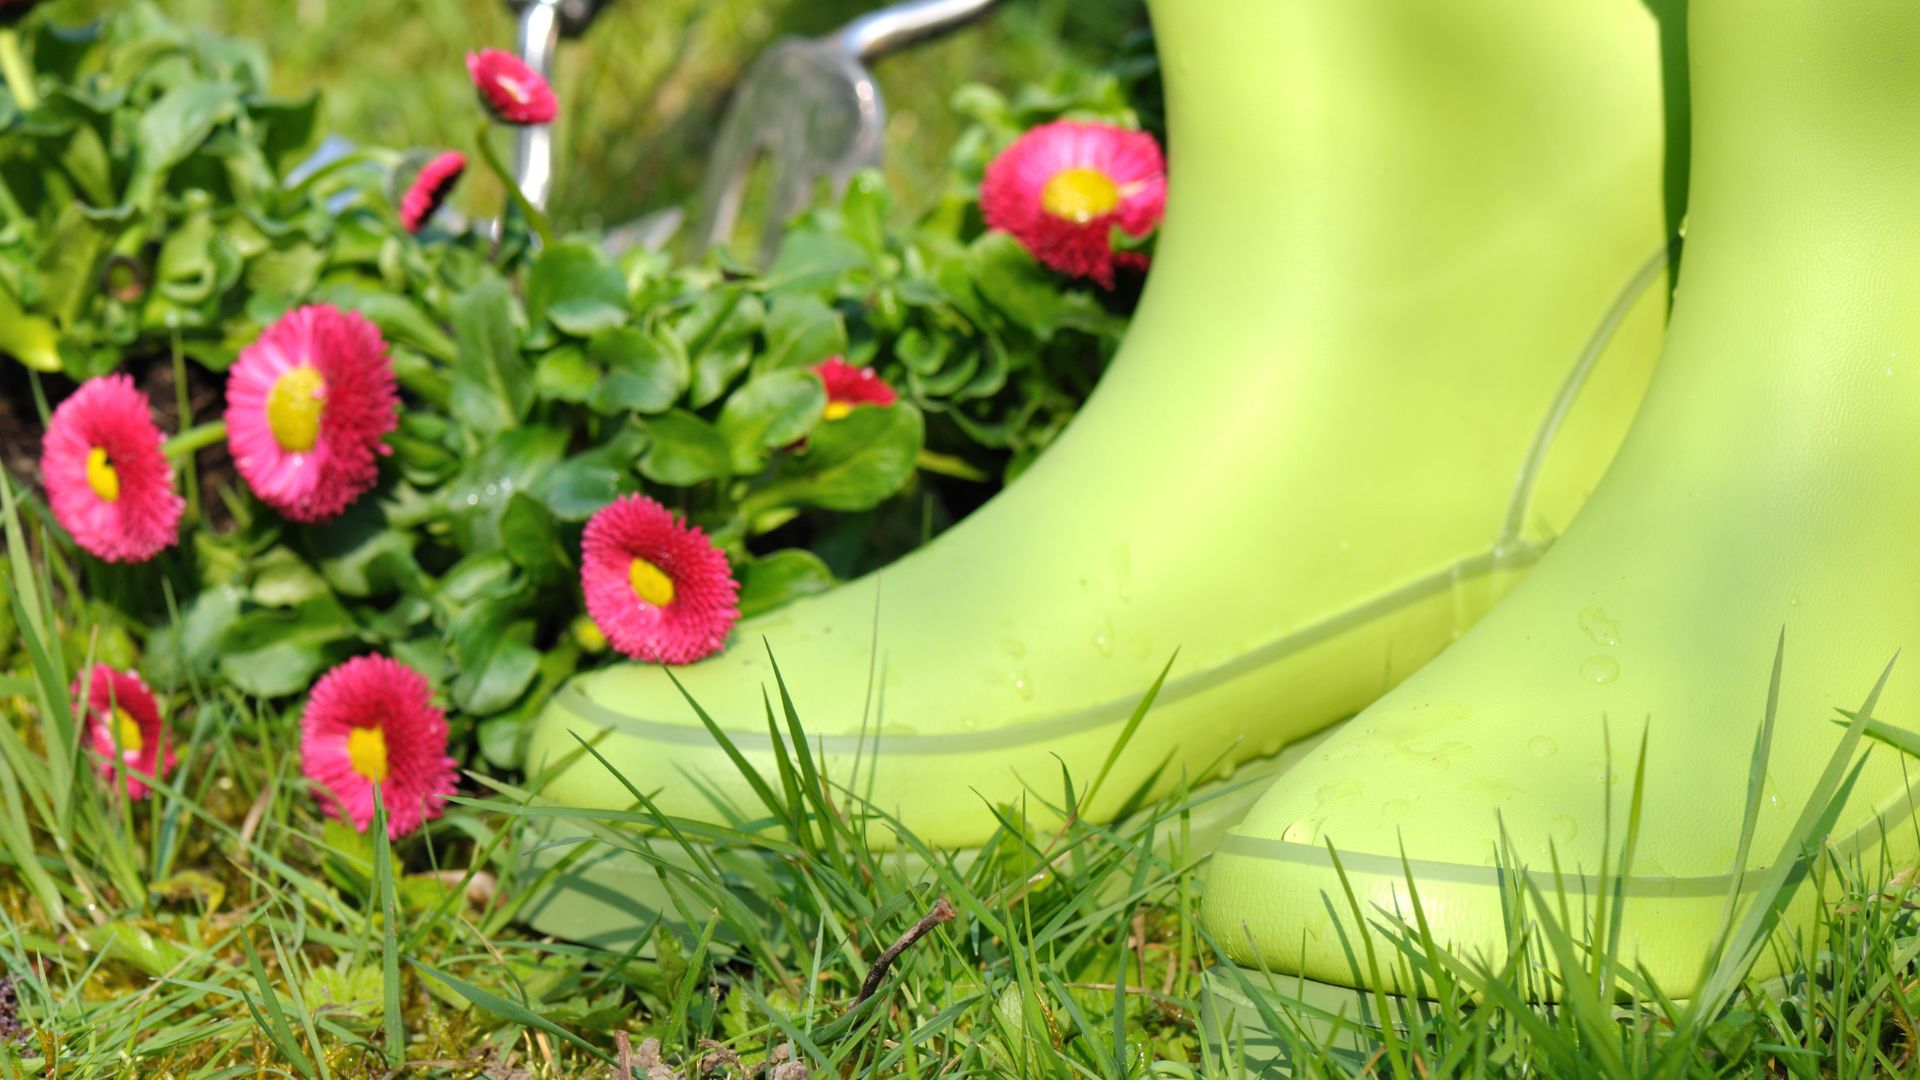 Photo of gardening boots and flowers.